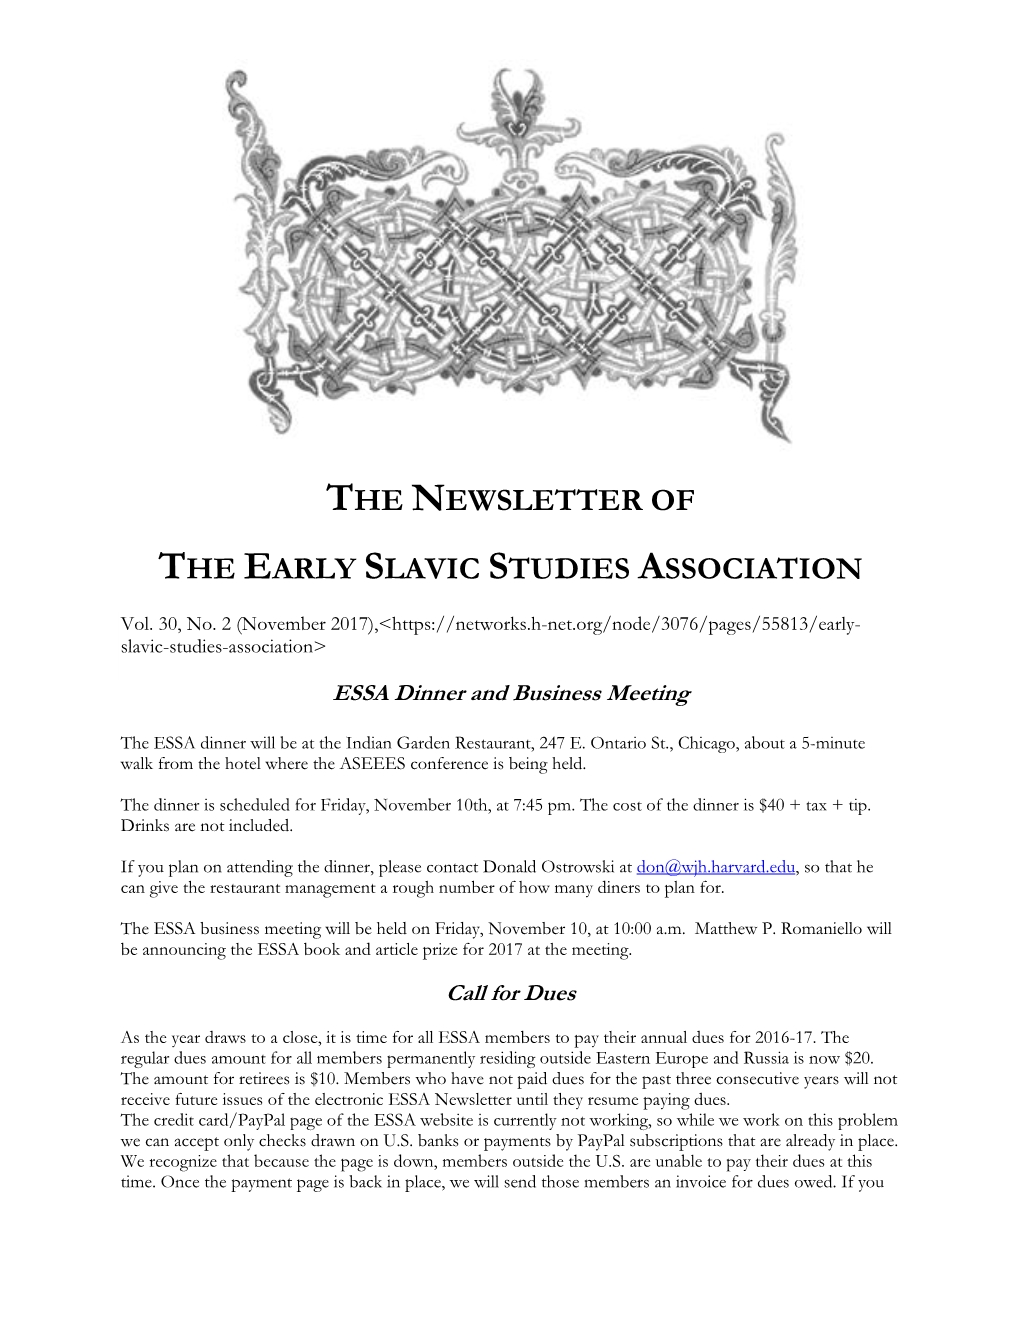 The Newsletter of the Early Slavic Studies Association